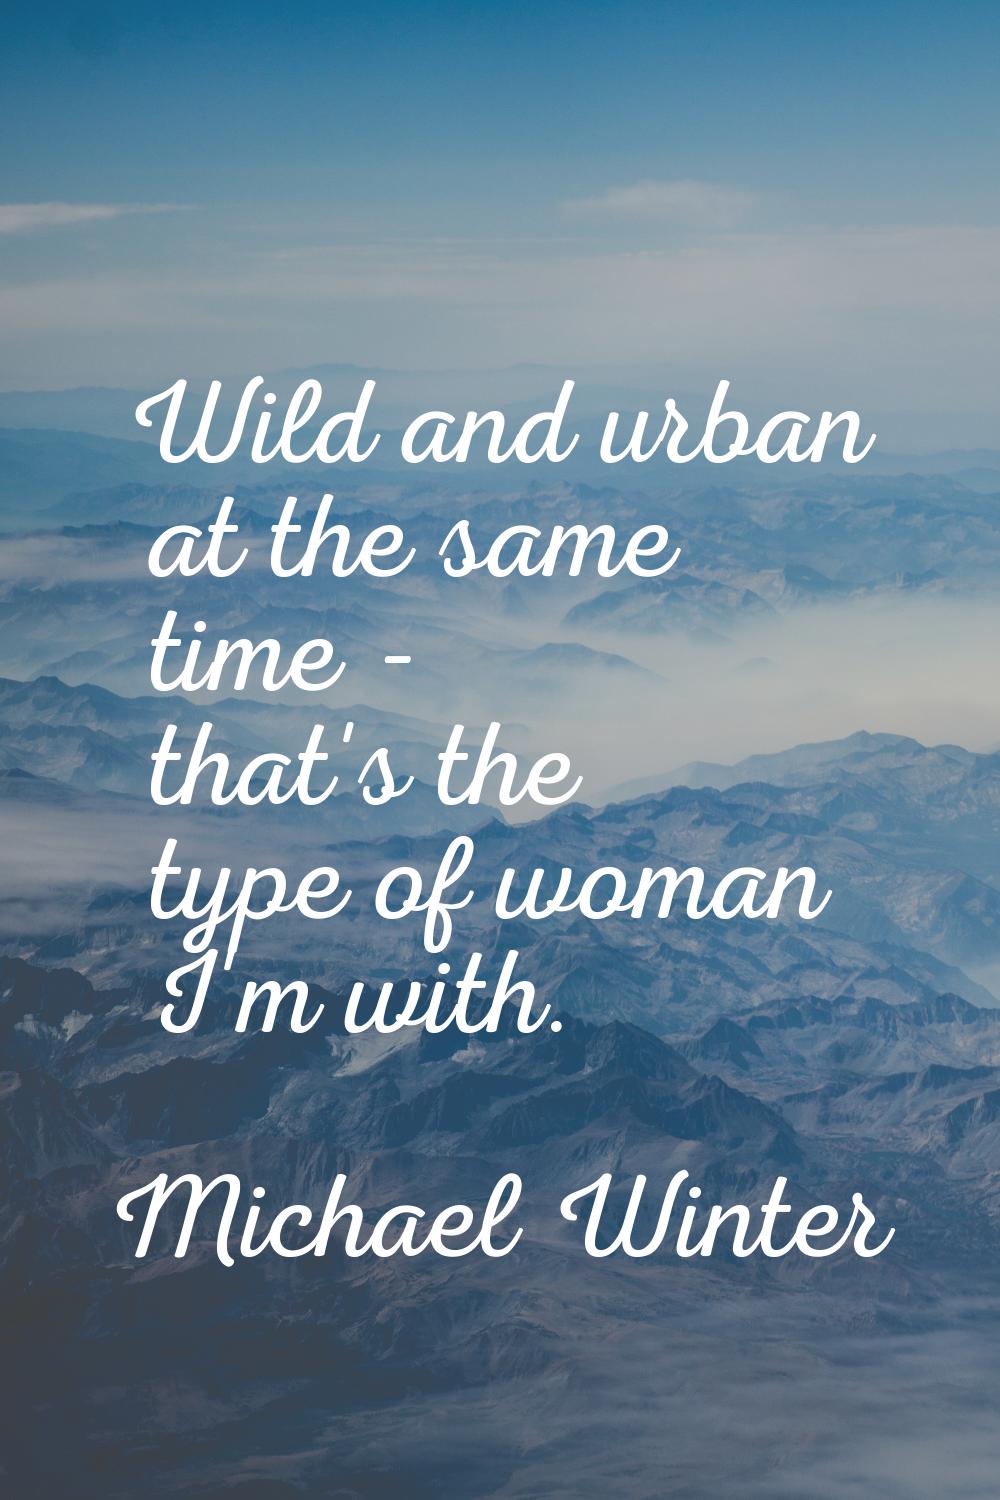 Wild and urban at the same time - that's the type of woman I'm with.